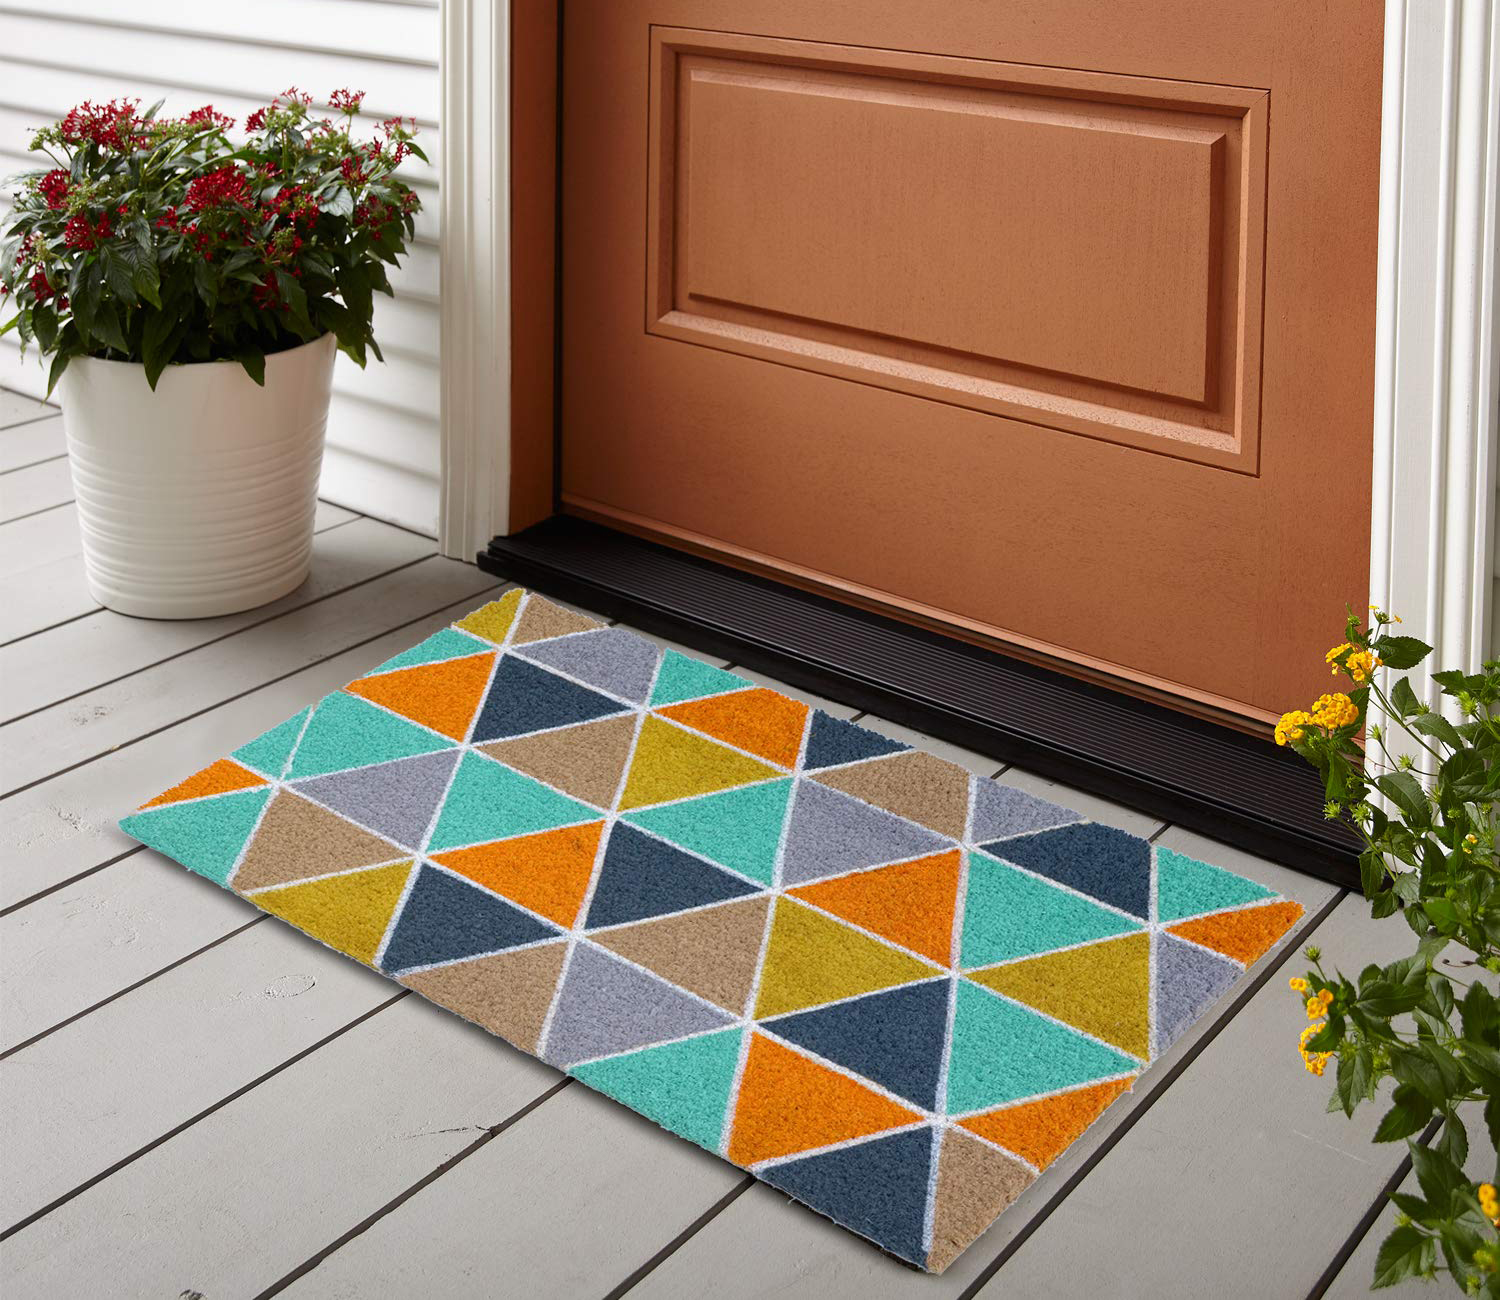 Where should a door mats be placed?